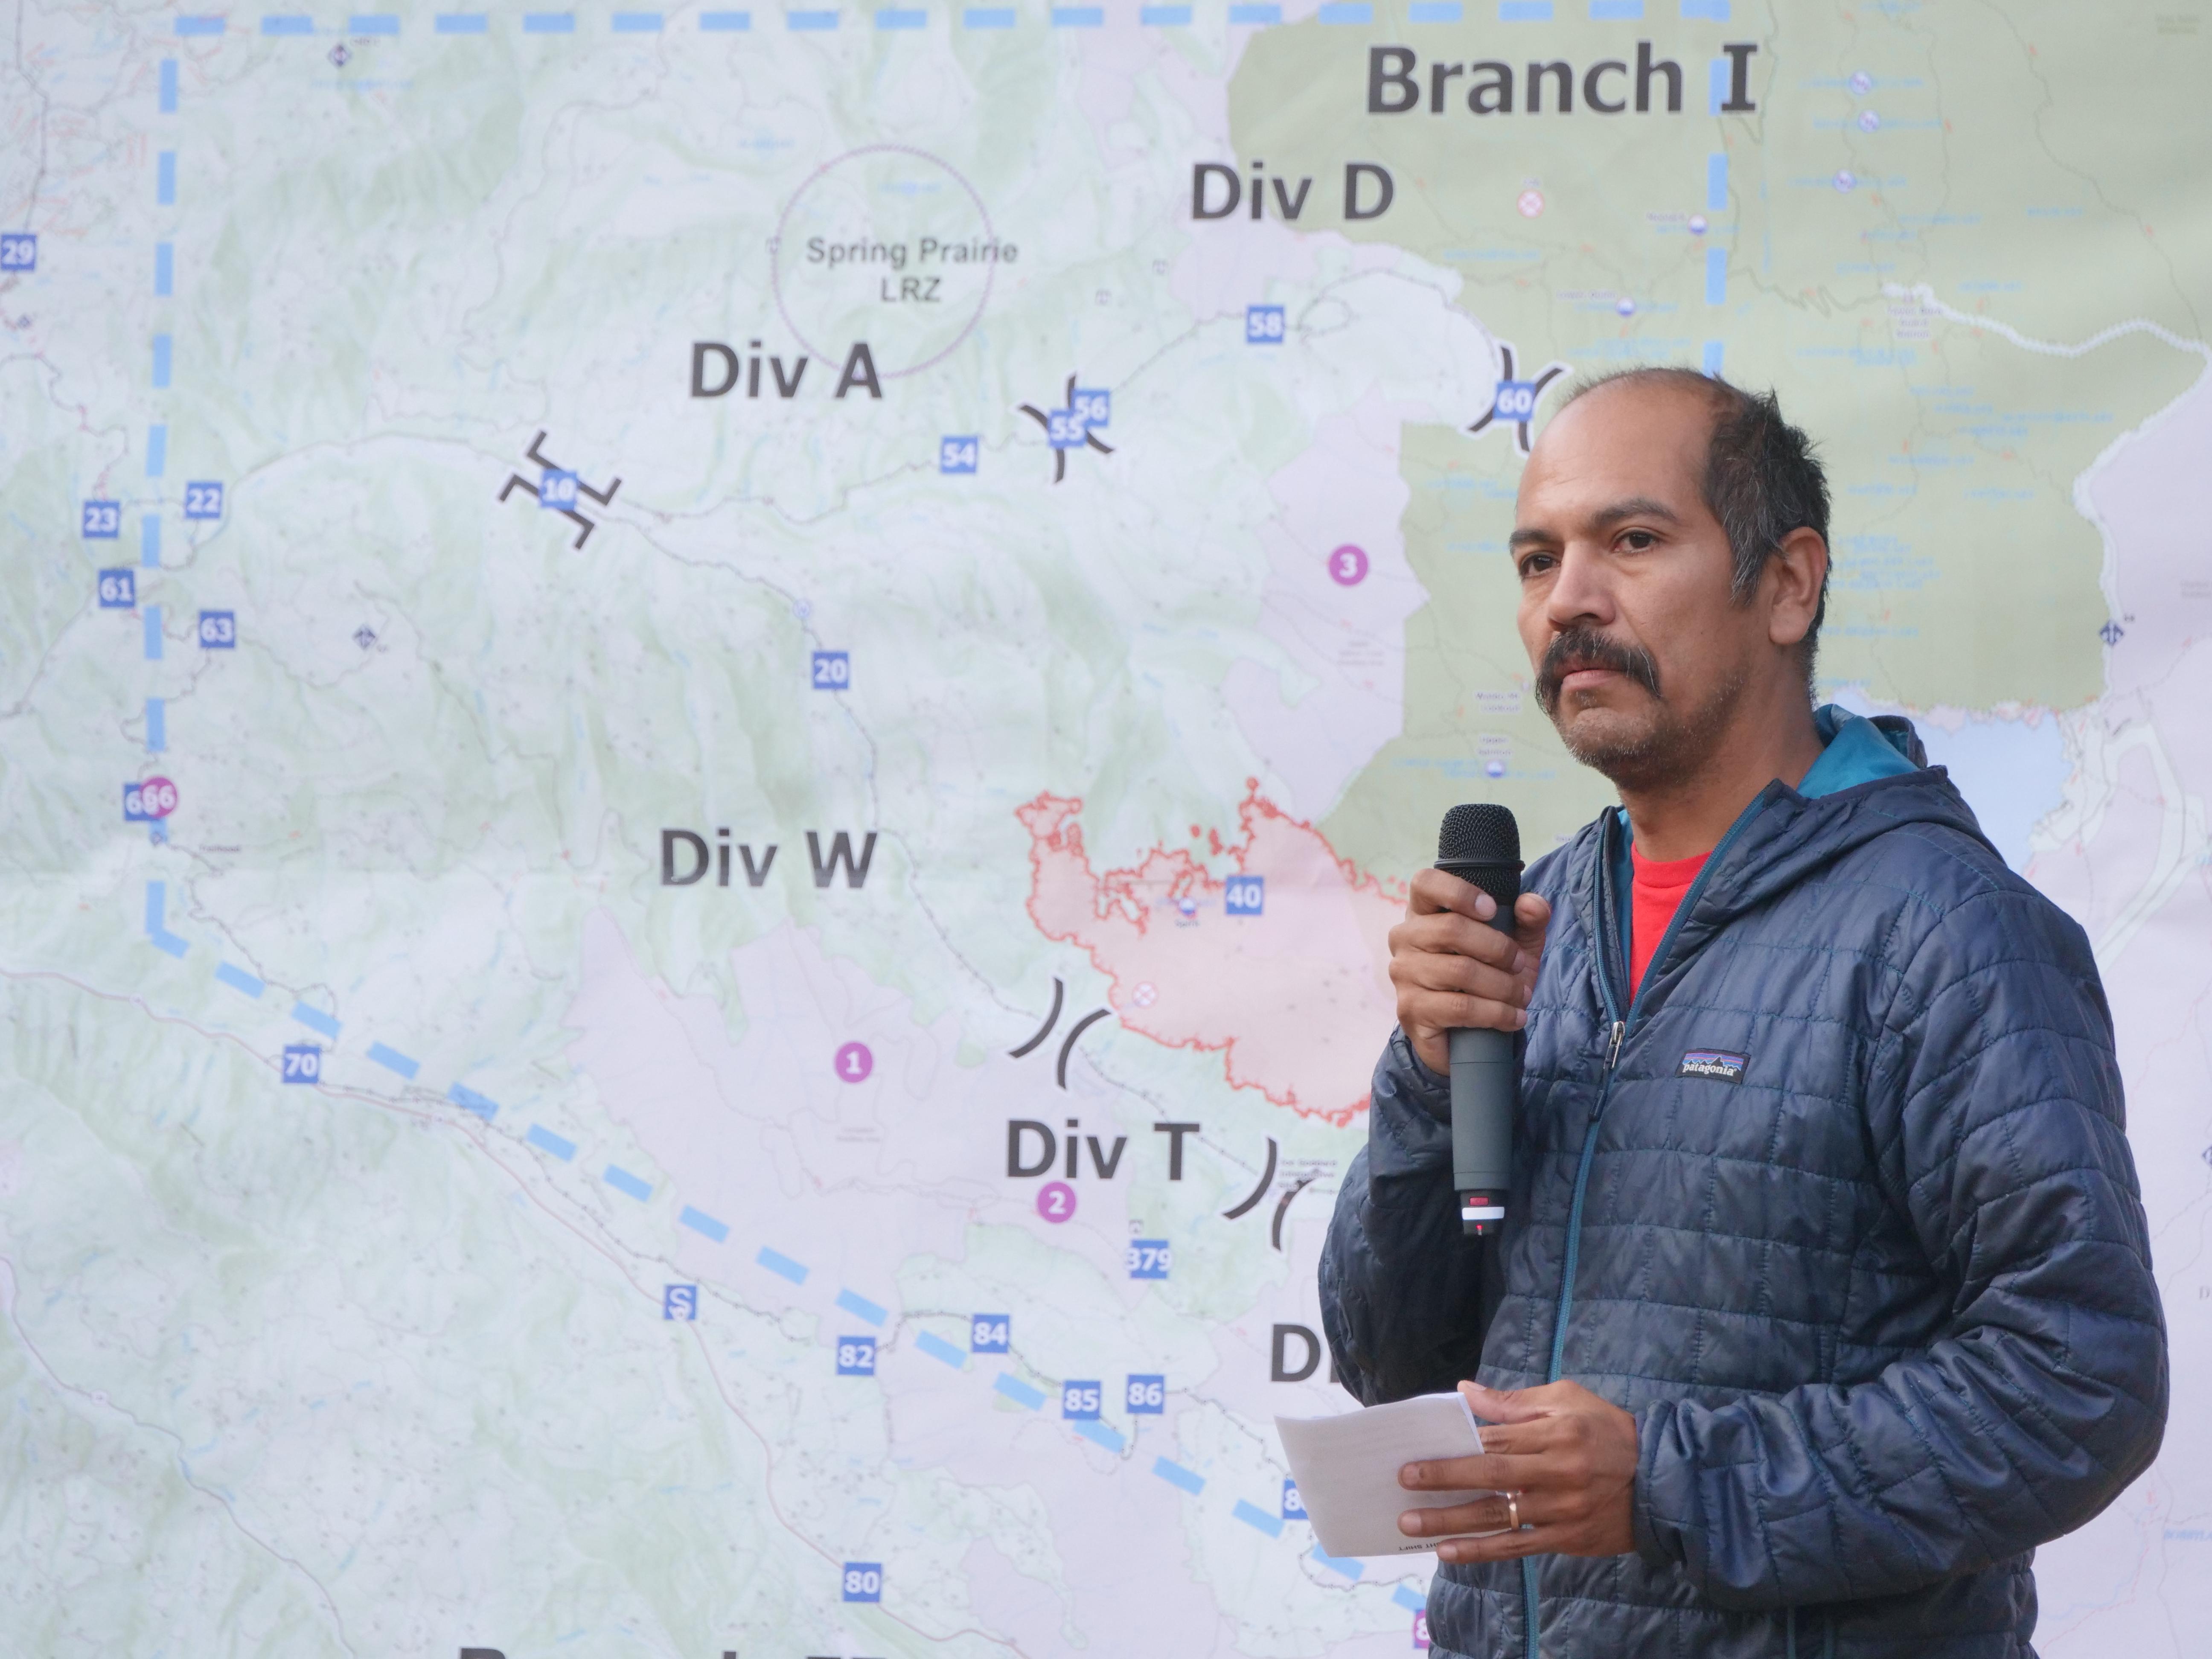 A man who works as a fire behavior analyst is talking in front of a map of the Cedar Creek Fire.